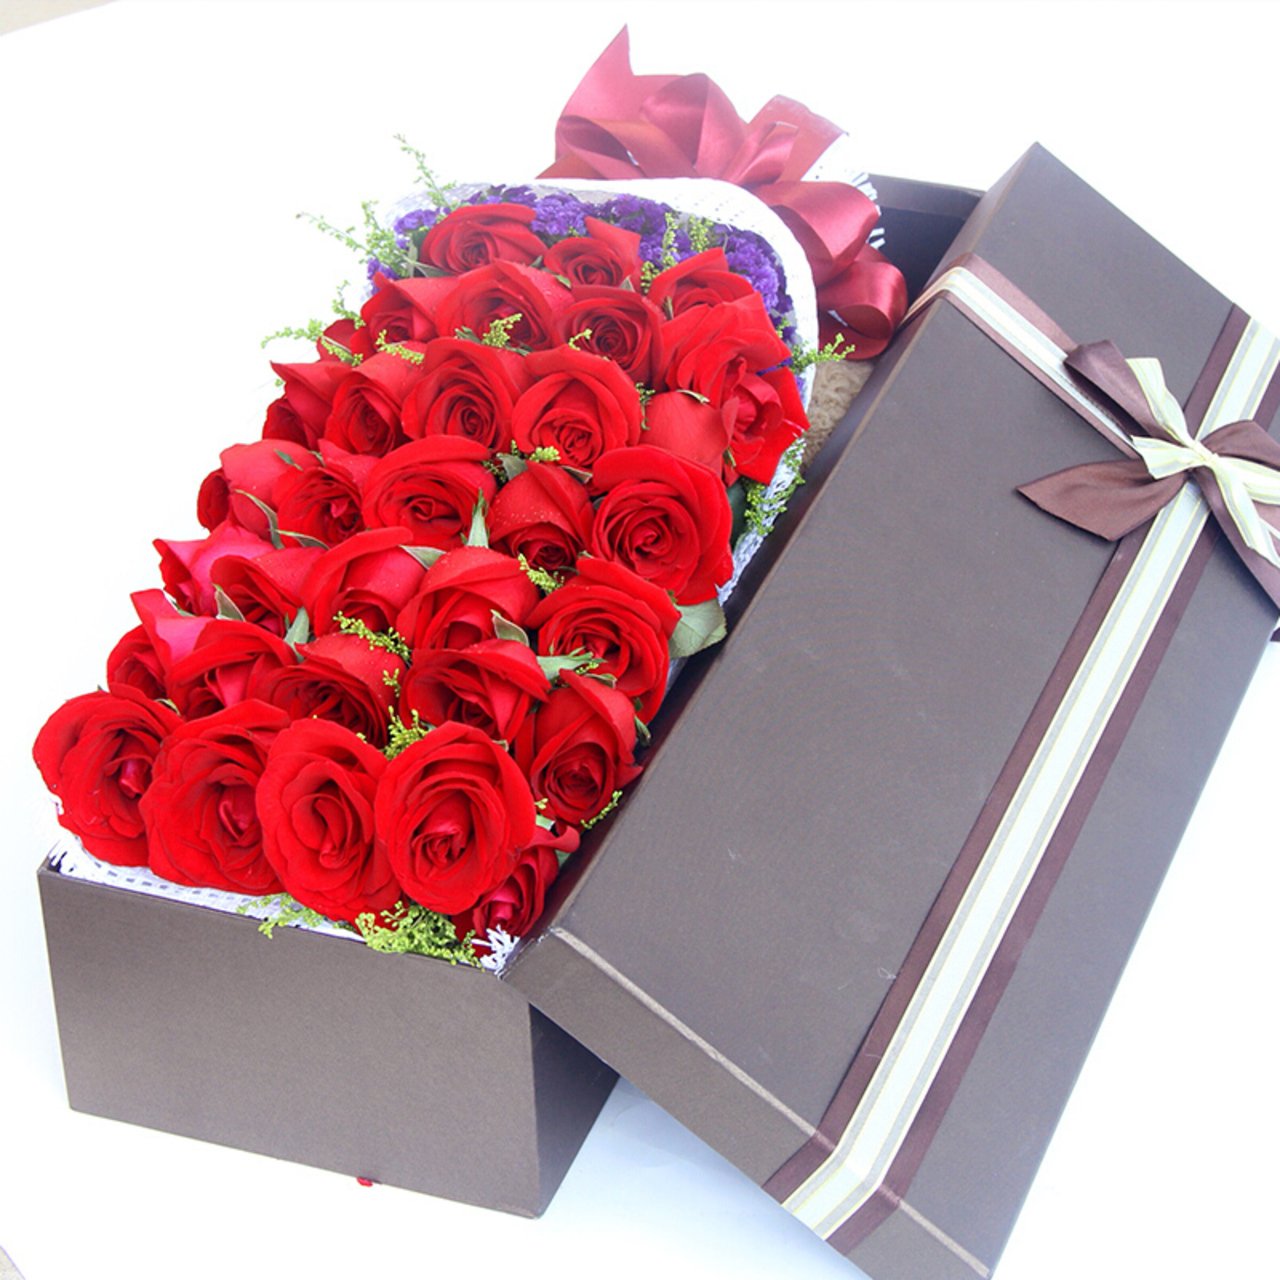 my favourite(
33 red roses and flowers gift box)